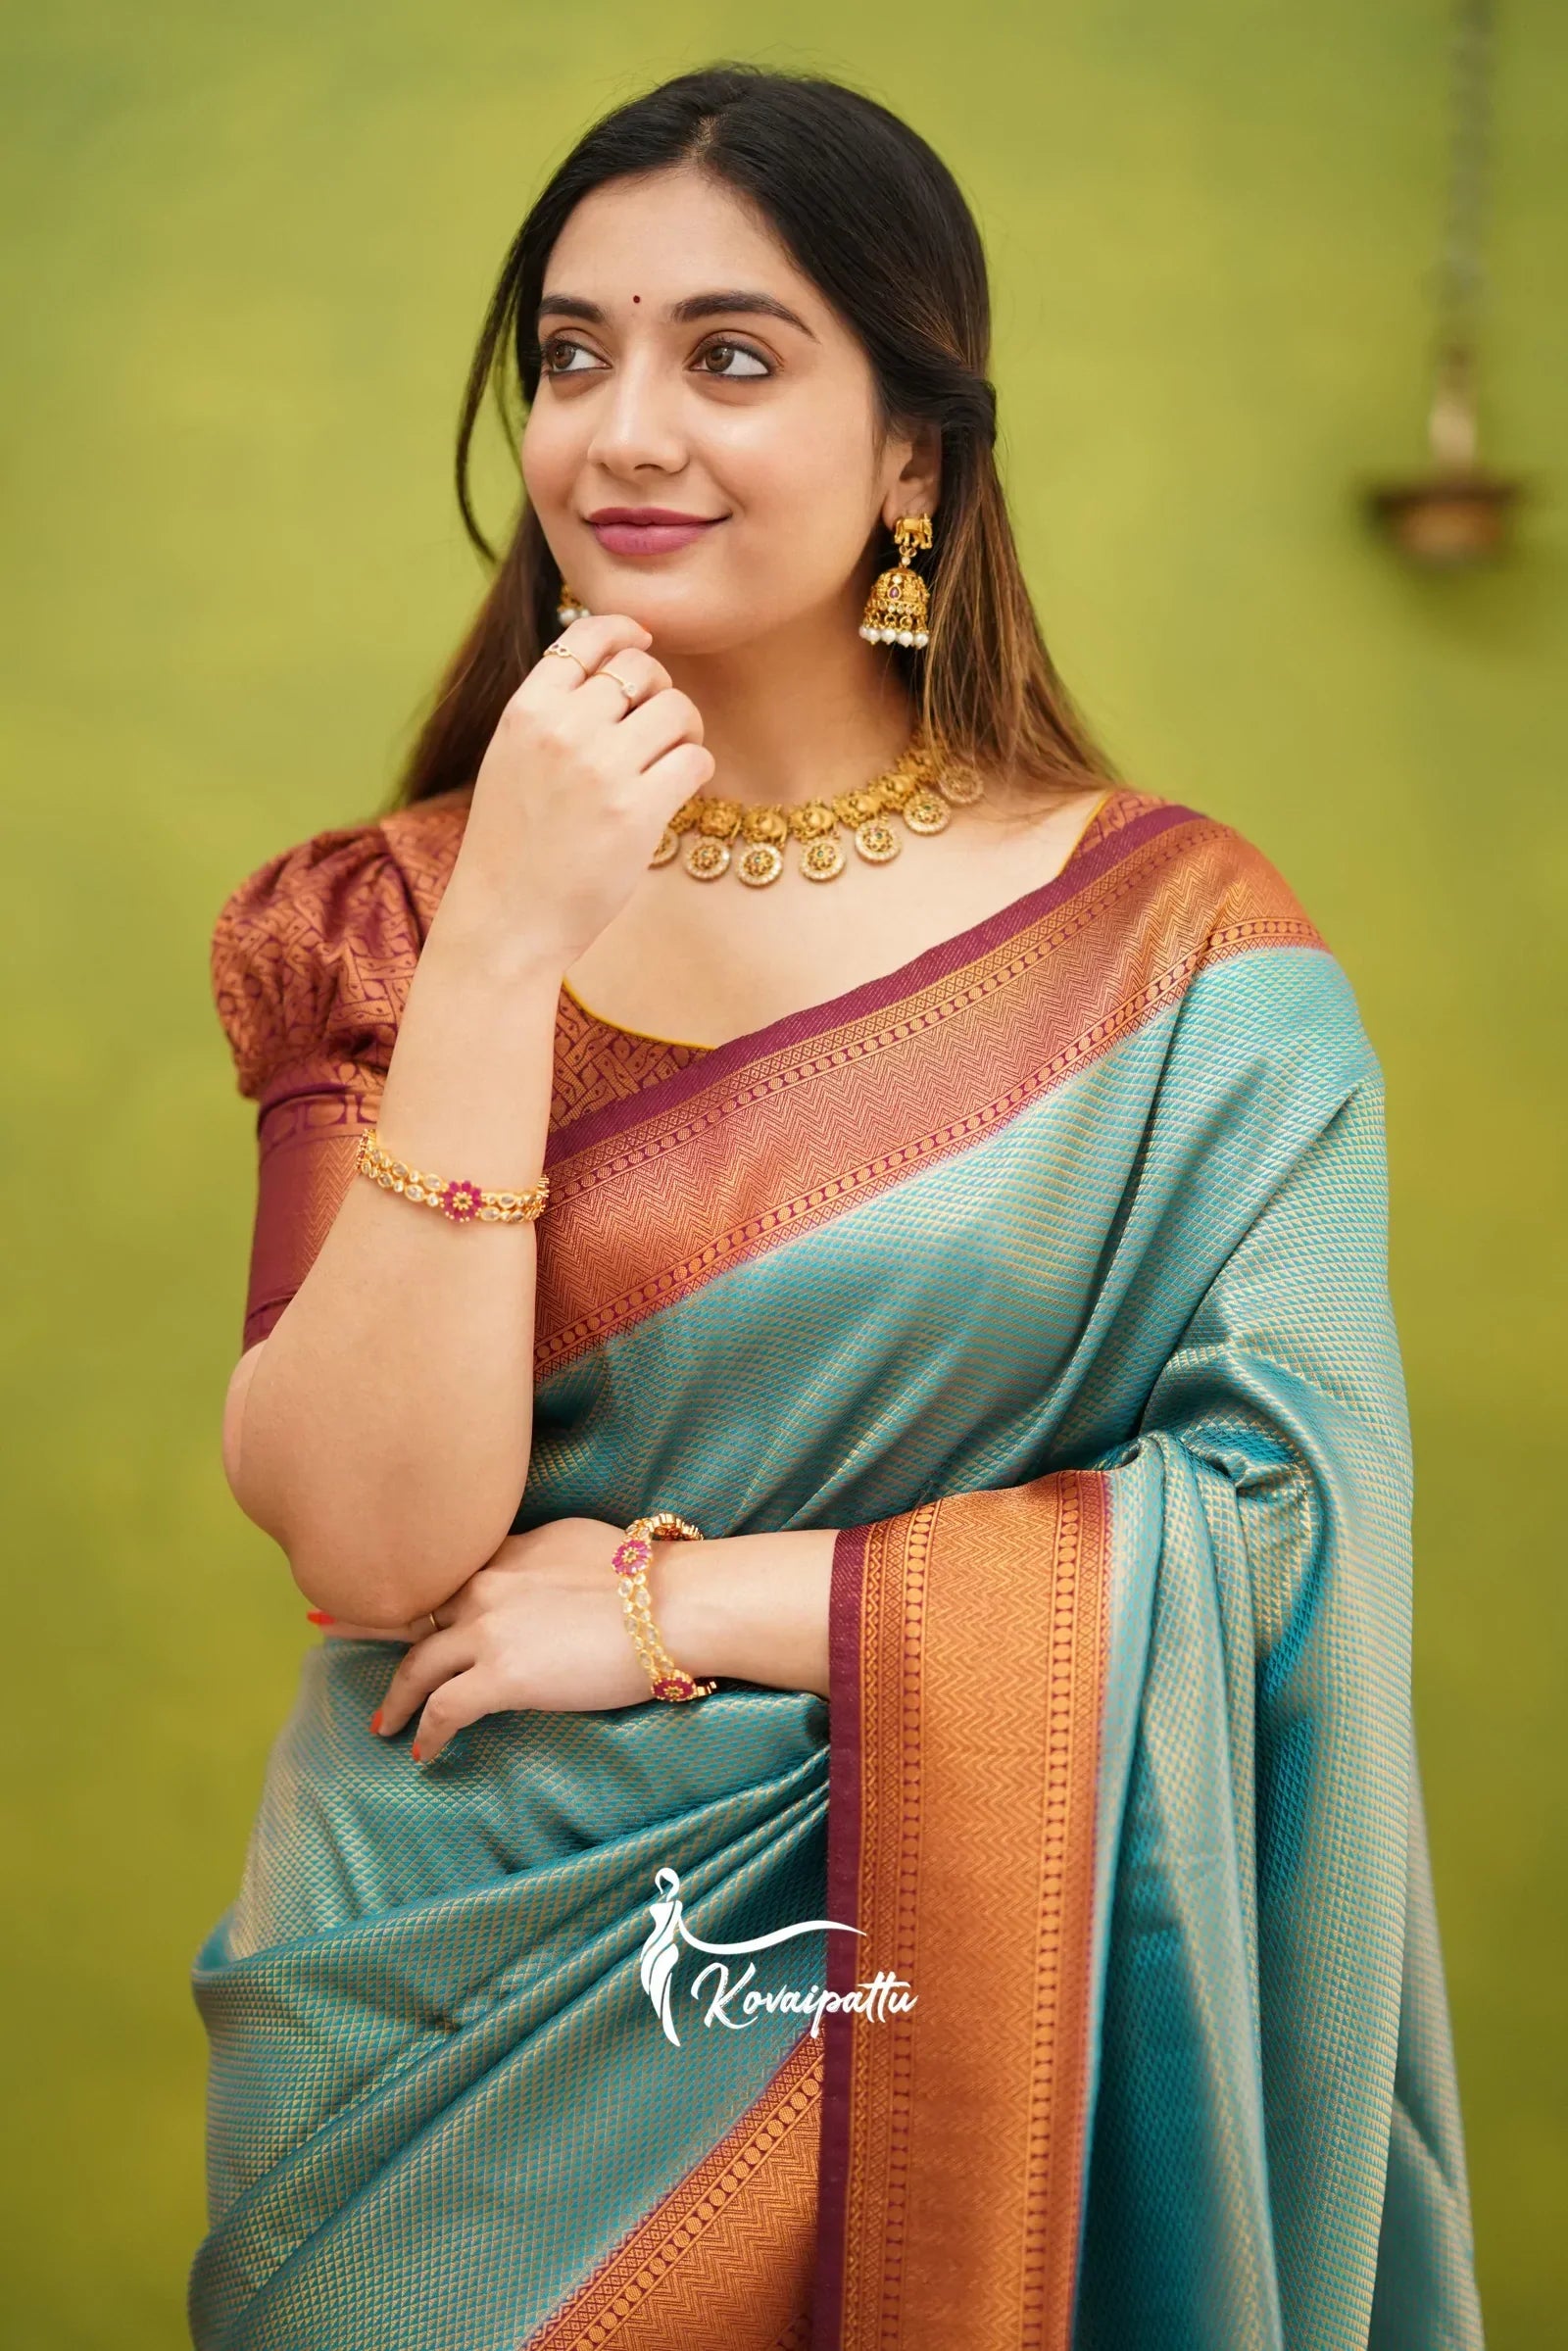 South Indian silk saree in rich earthy tones